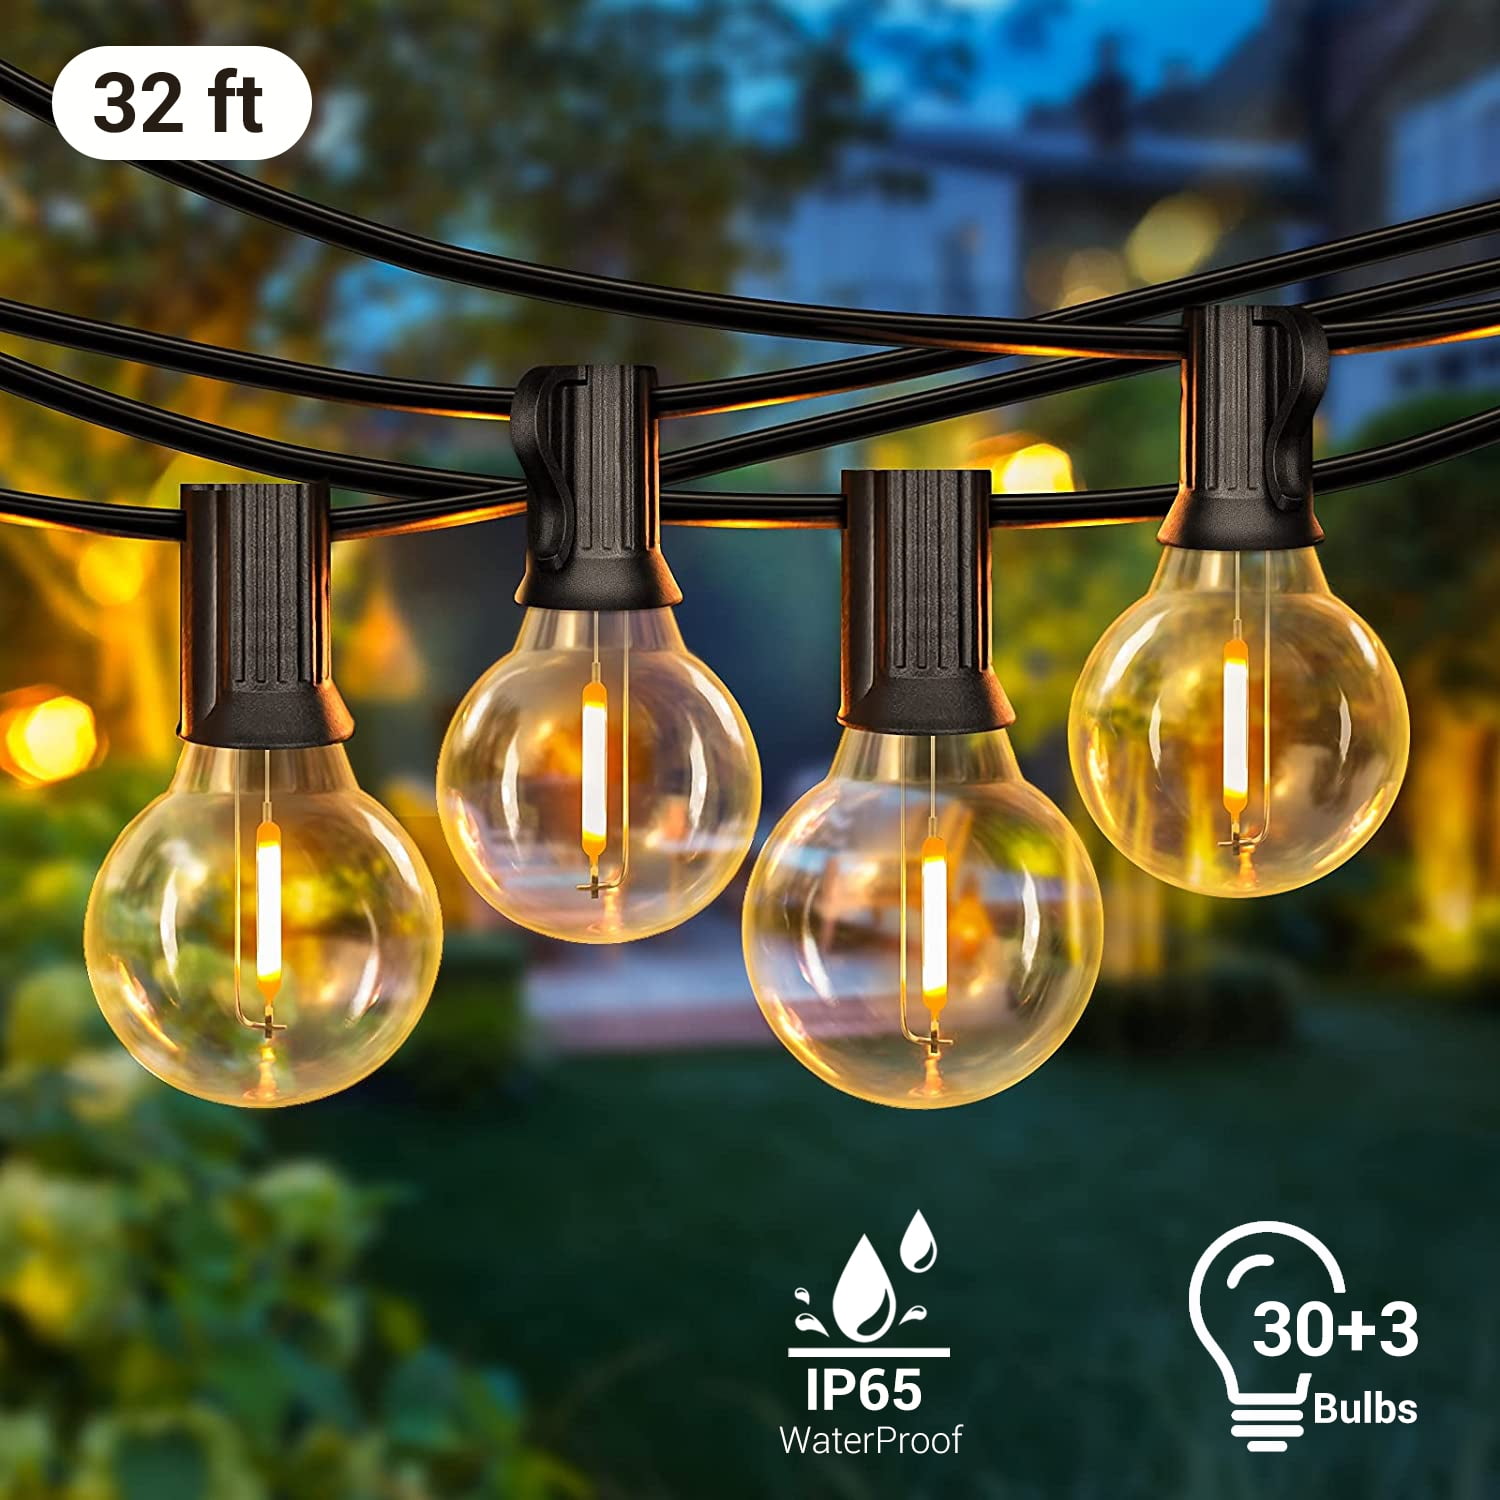 25Ft/ 30Ft/ 50Ft/ 100Ft Globe Bulbs Outdoor Waterproof Holiday String Lighting 